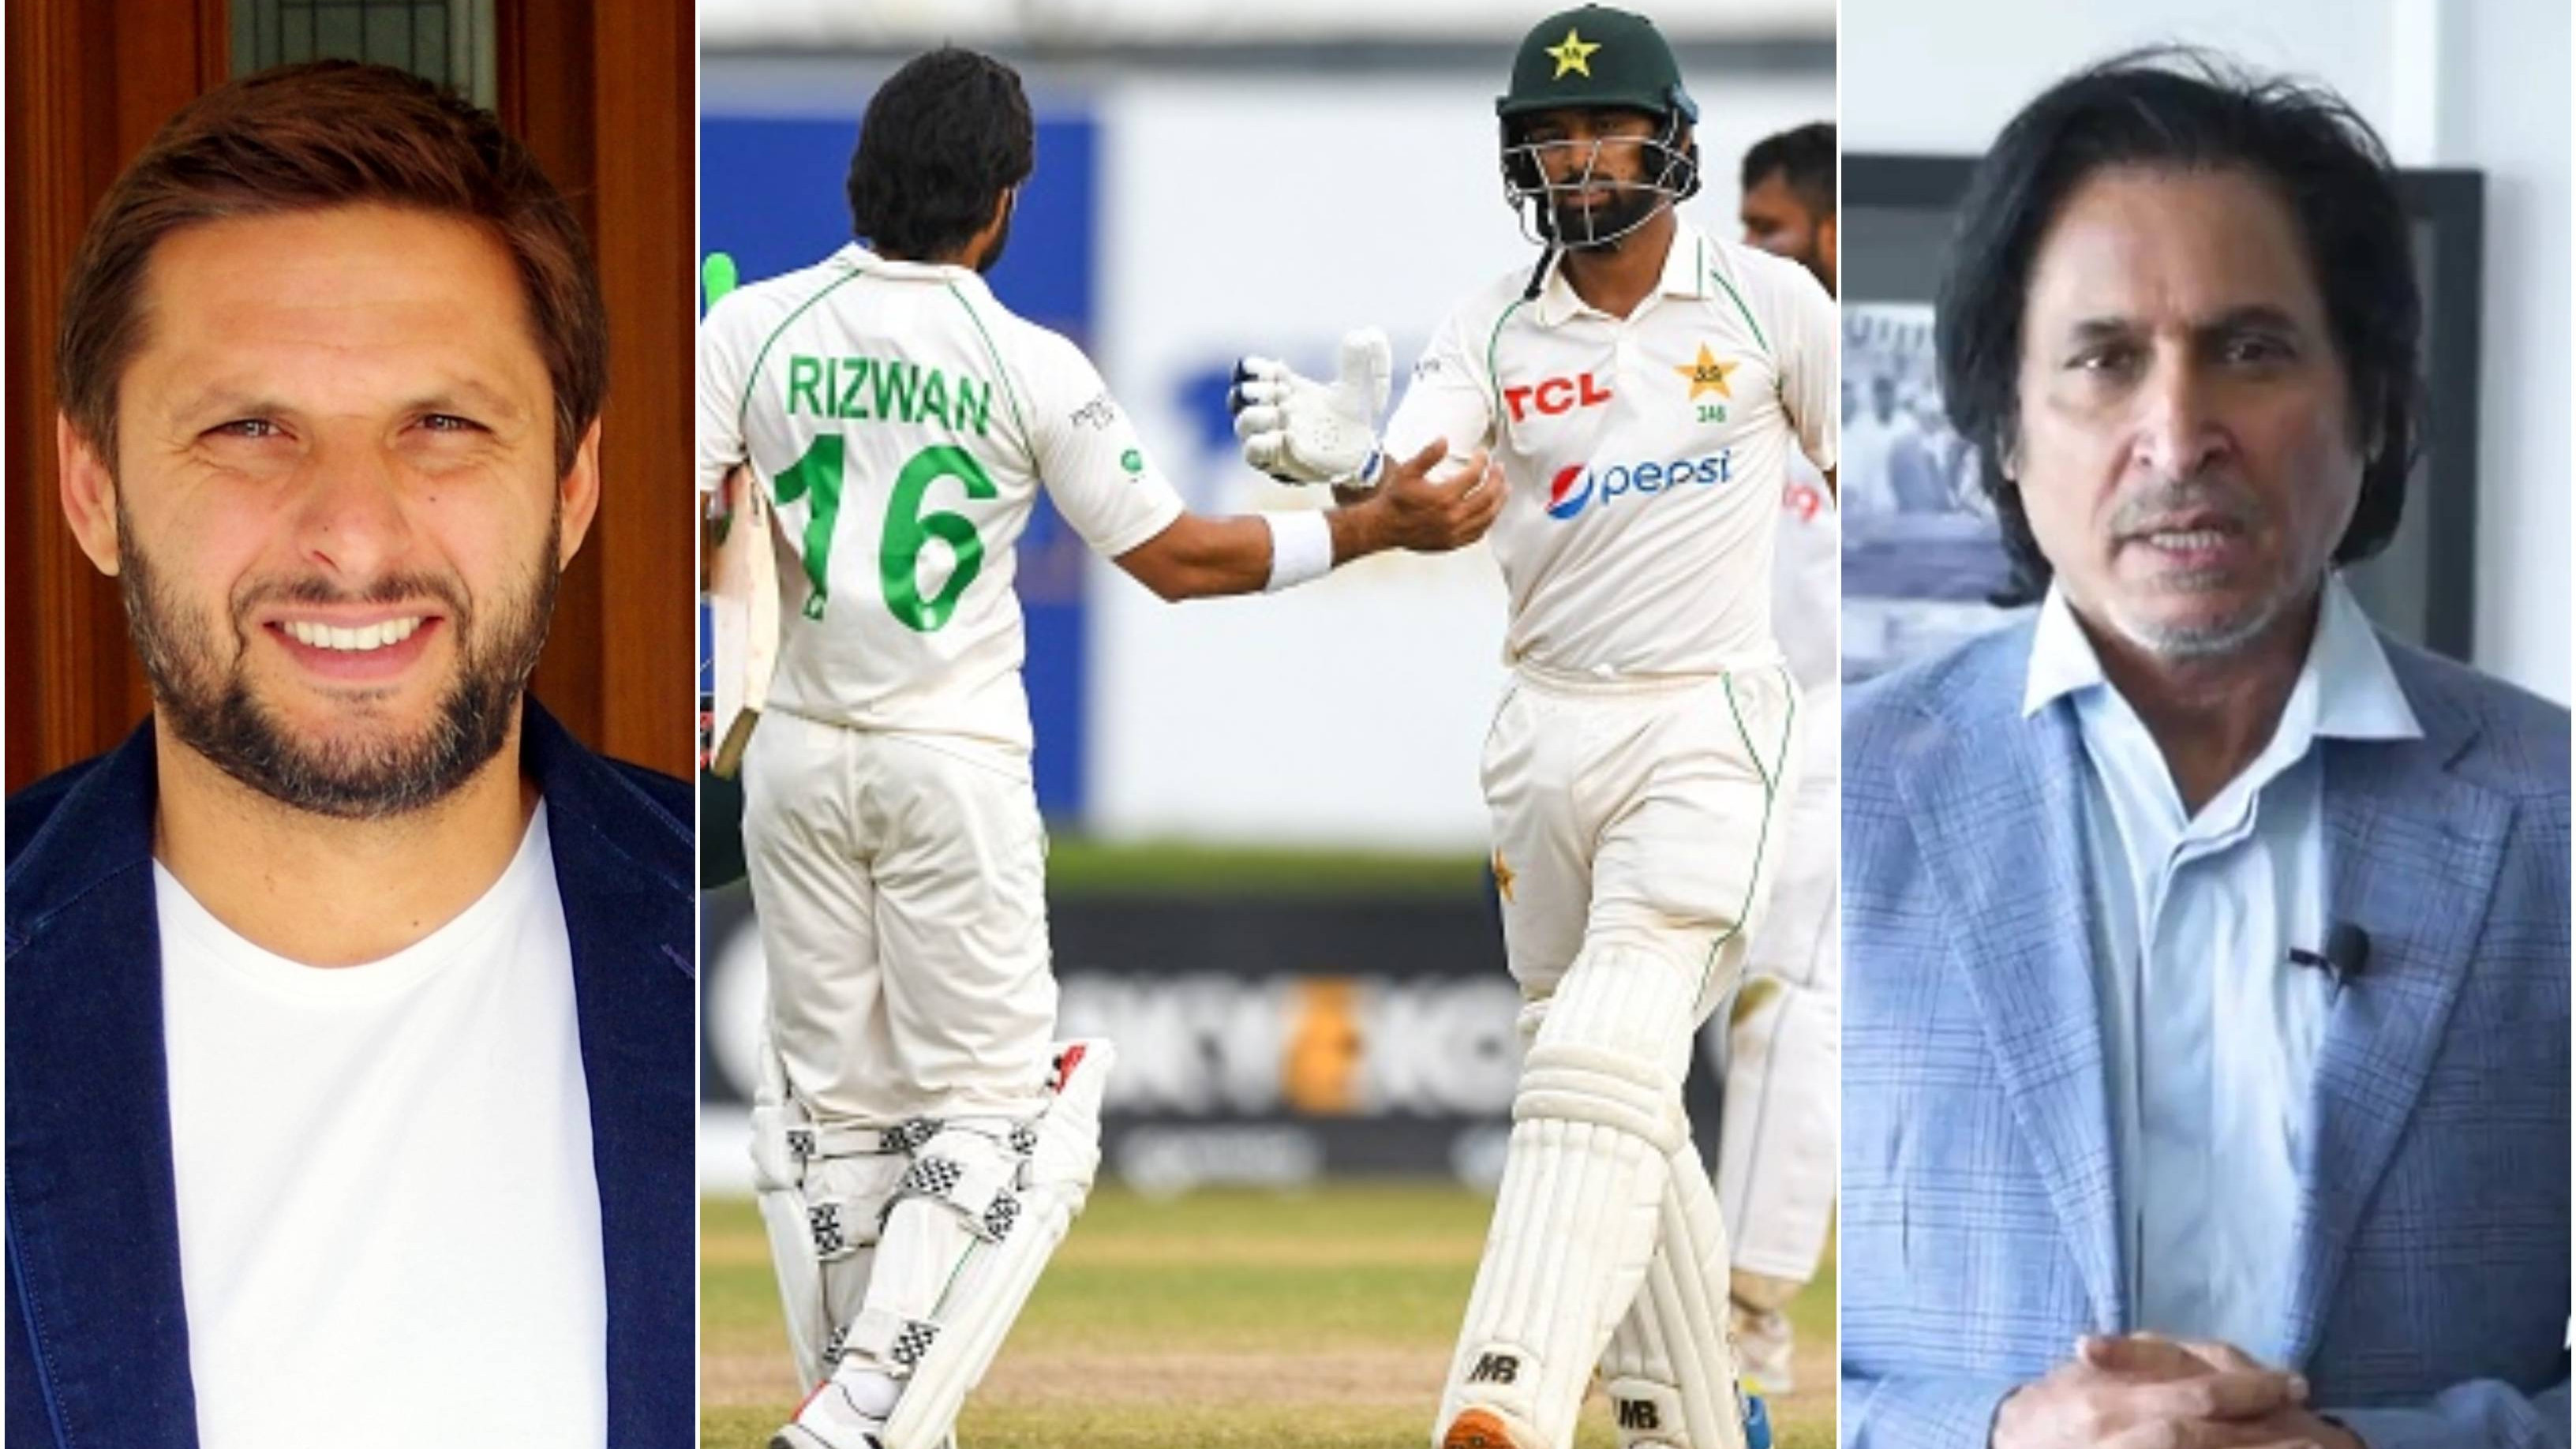 SL v PAK 2022: Cricket fraternity reacts as Abdullah Shafique’s unbeaten 160 powers Pakistan to 4-wicket win in 1st Test